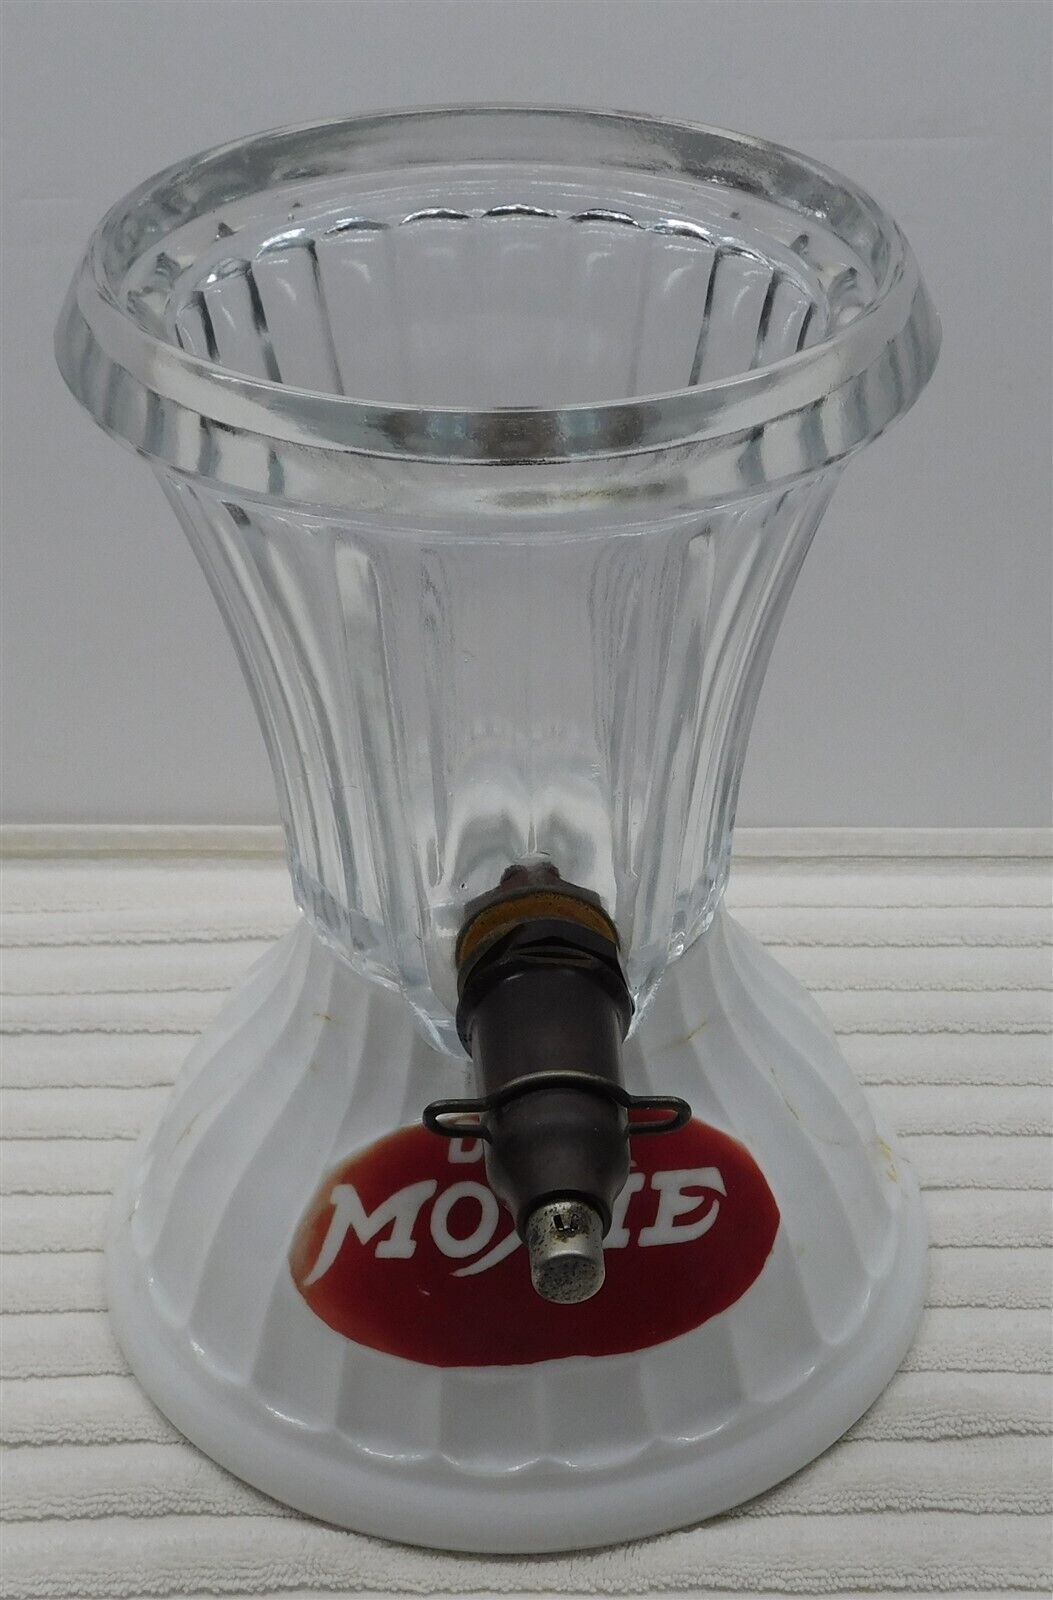 Vintage Drink Moxie Soda Fountain Milk Glass Base Counter Top Syrup Dispenser